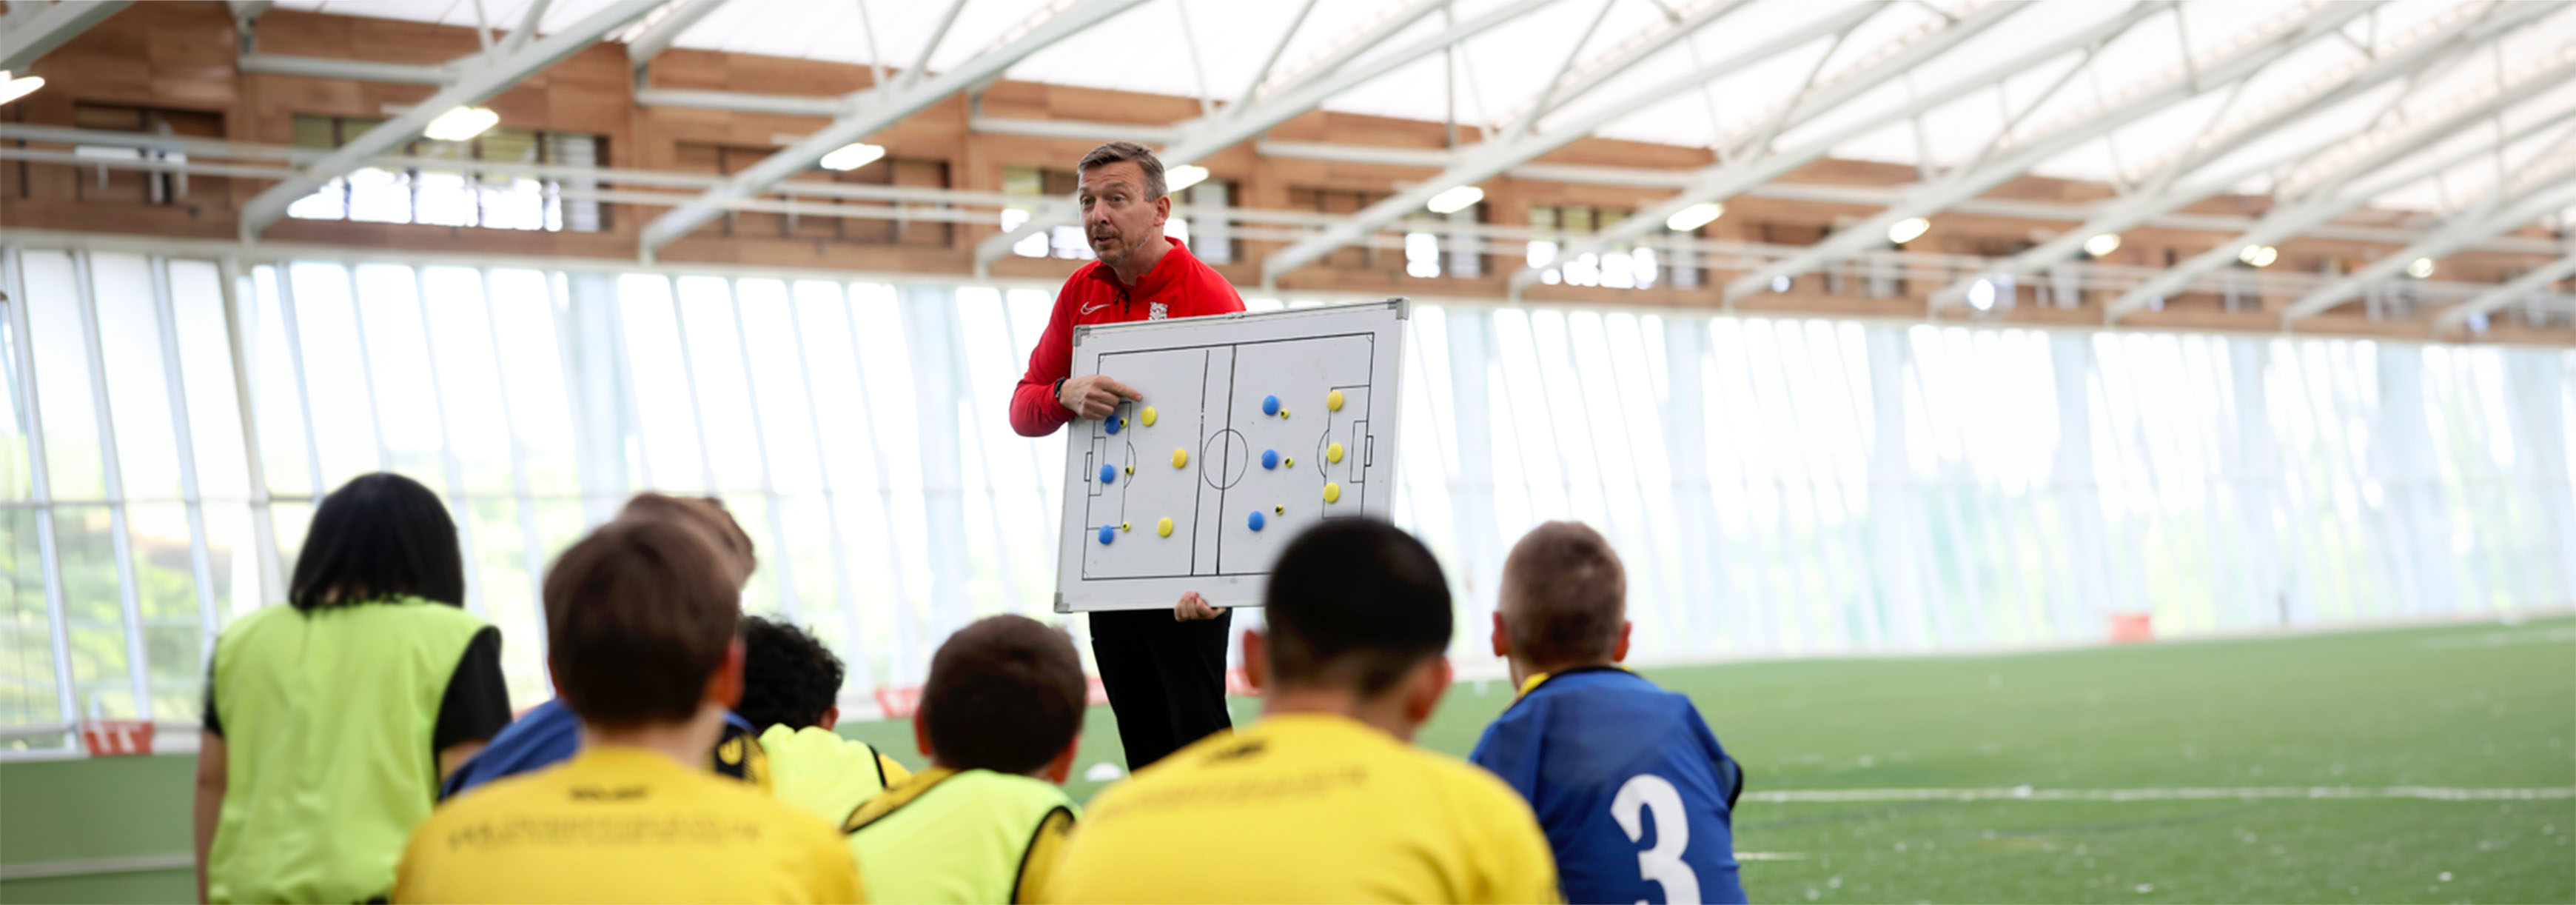 Coach points at board while players sit on the pitch